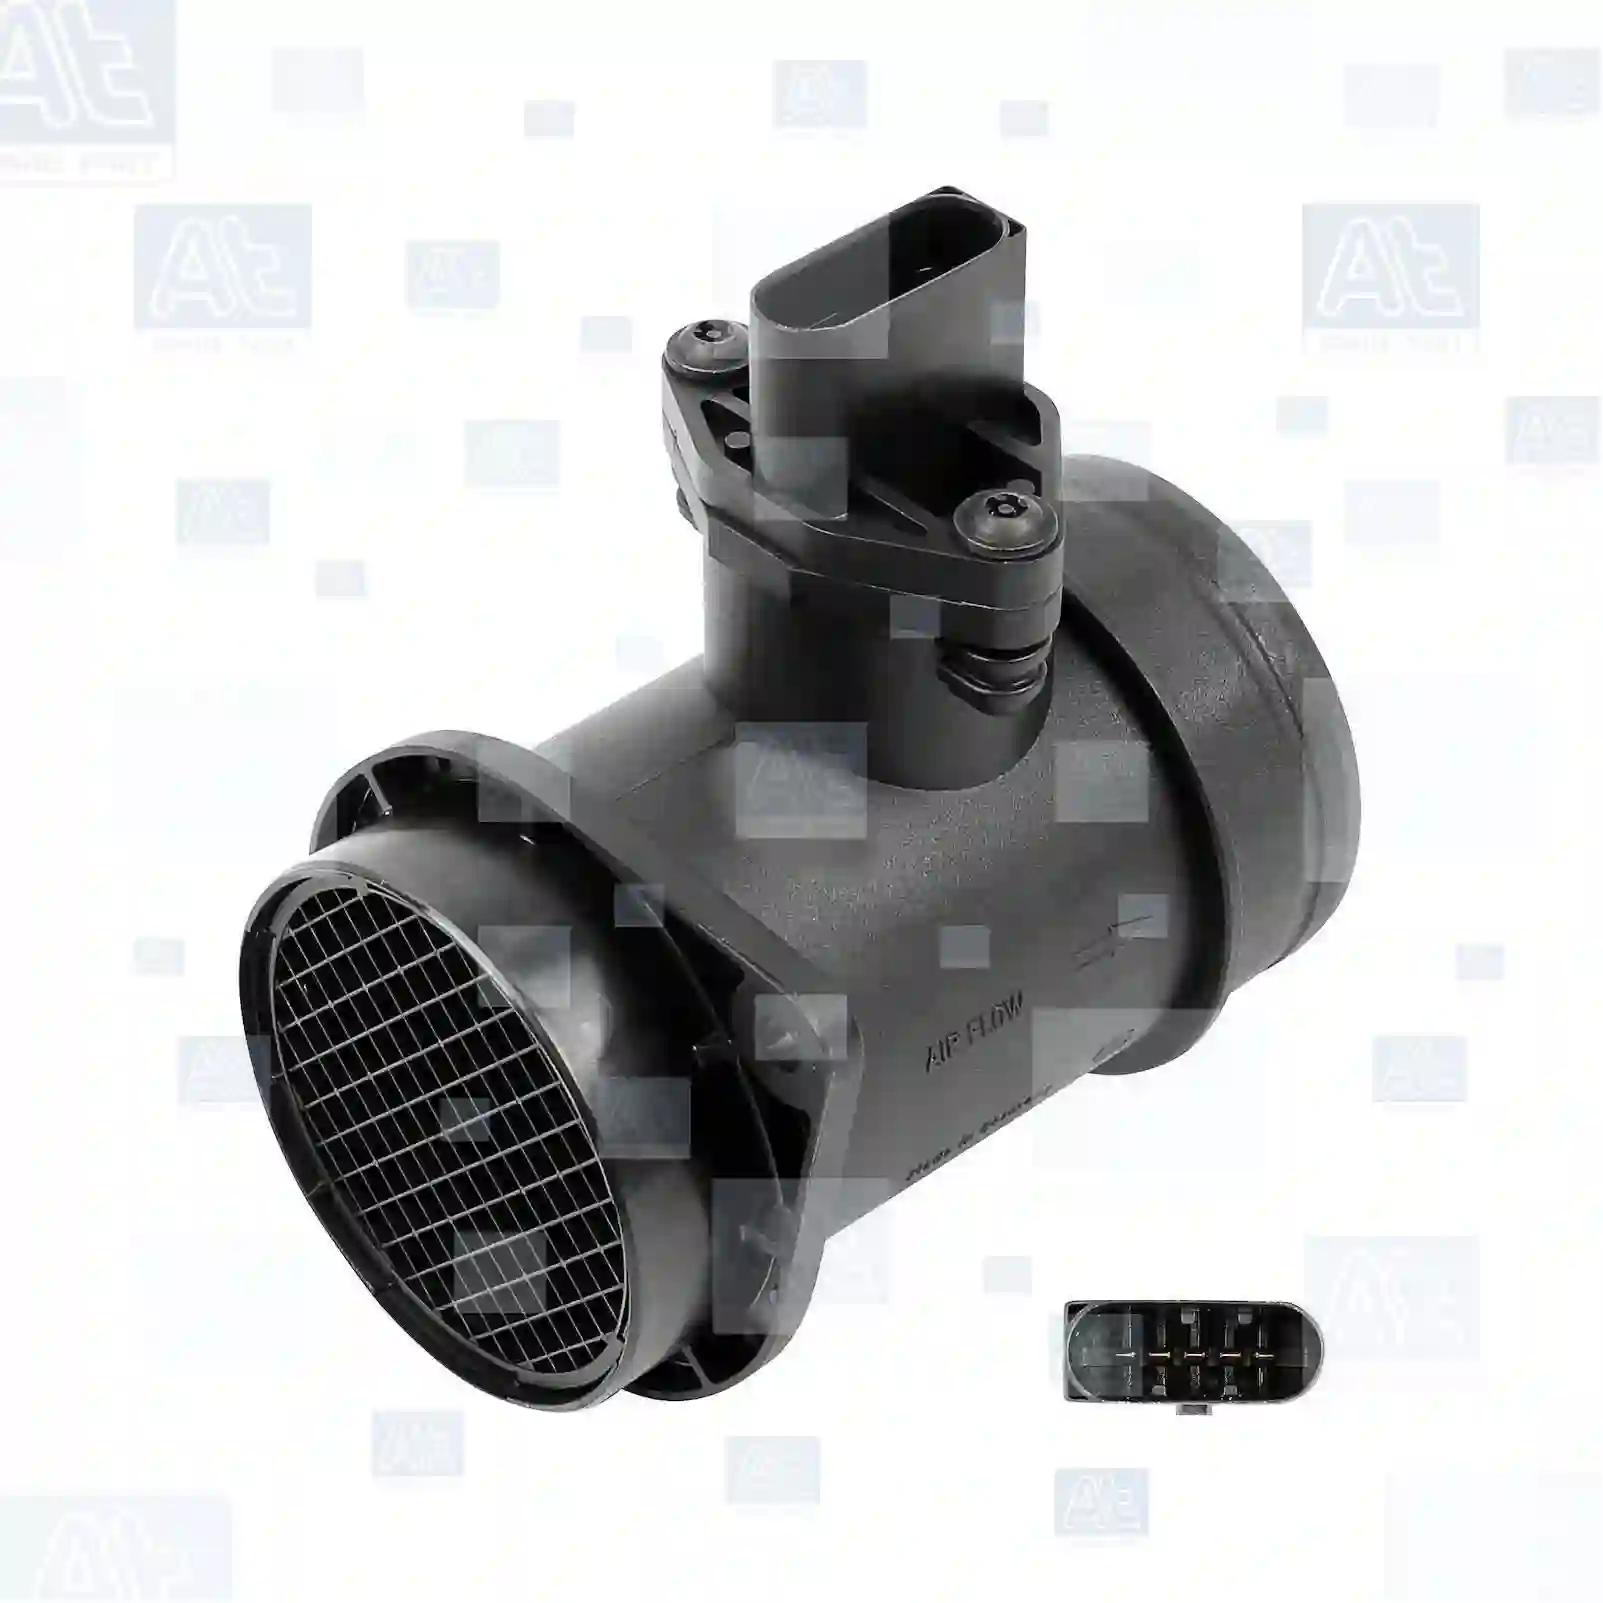 Air mass sensor, complete, 77706557, 028906461, 038906461C, 059906461B, 06A906461, 06A906461G, 06A906461L, 06A906461N, 07C906461, 07D906461, 1051396, 1344951, 1384275, 1428448, 95560612300, 028906461, 038906461C, 038906461D, 059906461B, 06A906461, 06A906461G, 06A906461L, 06A906461N, 07C906461, 07D906461, 028906461, 038906461C, 059906461B, 06A906461, 06A906461G, 06A906461L, 06A906461N, 07C906461, 07D906461, 028906461, 028906461X, 038906461C, 038906461D, 059906461B, 059906461BX, 06A906461, 06A906461G, 06A906461GX, 06A906461L, 06A906461LX, 06A906461N, 06A906461NX, 06A906461X, 07C906461, 07D906461 ||  77706557 At Spare Part | Engine, Accelerator Pedal, Camshaft, Connecting Rod, Crankcase, Crankshaft, Cylinder Head, Engine Suspension Mountings, Exhaust Manifold, Exhaust Gas Recirculation, Filter Kits, Flywheel Housing, General Overhaul Kits, Engine, Intake Manifold, Oil Cleaner, Oil Cooler, Oil Filter, Oil Pump, Oil Sump, Piston & Liner, Sensor & Switch, Timing Case, Turbocharger, Cooling System, Belt Tensioner, Coolant Filter, Coolant Pipe, Corrosion Prevention Agent, Drive, Expansion Tank, Fan, Intercooler, Monitors & Gauges, Radiator, Thermostat, V-Belt / Timing belt, Water Pump, Fuel System, Electronical Injector Unit, Feed Pump, Fuel Filter, cpl., Fuel Gauge Sender,  Fuel Line, Fuel Pump, Fuel Tank, Injection Line Kit, Injection Pump, Exhaust System, Clutch & Pedal, Gearbox, Propeller Shaft, Axles, Brake System, Hubs & Wheels, Suspension, Leaf Spring, Universal Parts / Accessories, Steering, Electrical System, Cabin Air mass sensor, complete, 77706557, 028906461, 038906461C, 059906461B, 06A906461, 06A906461G, 06A906461L, 06A906461N, 07C906461, 07D906461, 1051396, 1344951, 1384275, 1428448, 95560612300, 028906461, 038906461C, 038906461D, 059906461B, 06A906461, 06A906461G, 06A906461L, 06A906461N, 07C906461, 07D906461, 028906461, 038906461C, 059906461B, 06A906461, 06A906461G, 06A906461L, 06A906461N, 07C906461, 07D906461, 028906461, 028906461X, 038906461C, 038906461D, 059906461B, 059906461BX, 06A906461, 06A906461G, 06A906461GX, 06A906461L, 06A906461LX, 06A906461N, 06A906461NX, 06A906461X, 07C906461, 07D906461 ||  77706557 At Spare Part | Engine, Accelerator Pedal, Camshaft, Connecting Rod, Crankcase, Crankshaft, Cylinder Head, Engine Suspension Mountings, Exhaust Manifold, Exhaust Gas Recirculation, Filter Kits, Flywheel Housing, General Overhaul Kits, Engine, Intake Manifold, Oil Cleaner, Oil Cooler, Oil Filter, Oil Pump, Oil Sump, Piston & Liner, Sensor & Switch, Timing Case, Turbocharger, Cooling System, Belt Tensioner, Coolant Filter, Coolant Pipe, Corrosion Prevention Agent, Drive, Expansion Tank, Fan, Intercooler, Monitors & Gauges, Radiator, Thermostat, V-Belt / Timing belt, Water Pump, Fuel System, Electronical Injector Unit, Feed Pump, Fuel Filter, cpl., Fuel Gauge Sender,  Fuel Line, Fuel Pump, Fuel Tank, Injection Line Kit, Injection Pump, Exhaust System, Clutch & Pedal, Gearbox, Propeller Shaft, Axles, Brake System, Hubs & Wheels, Suspension, Leaf Spring, Universal Parts / Accessories, Steering, Electrical System, Cabin